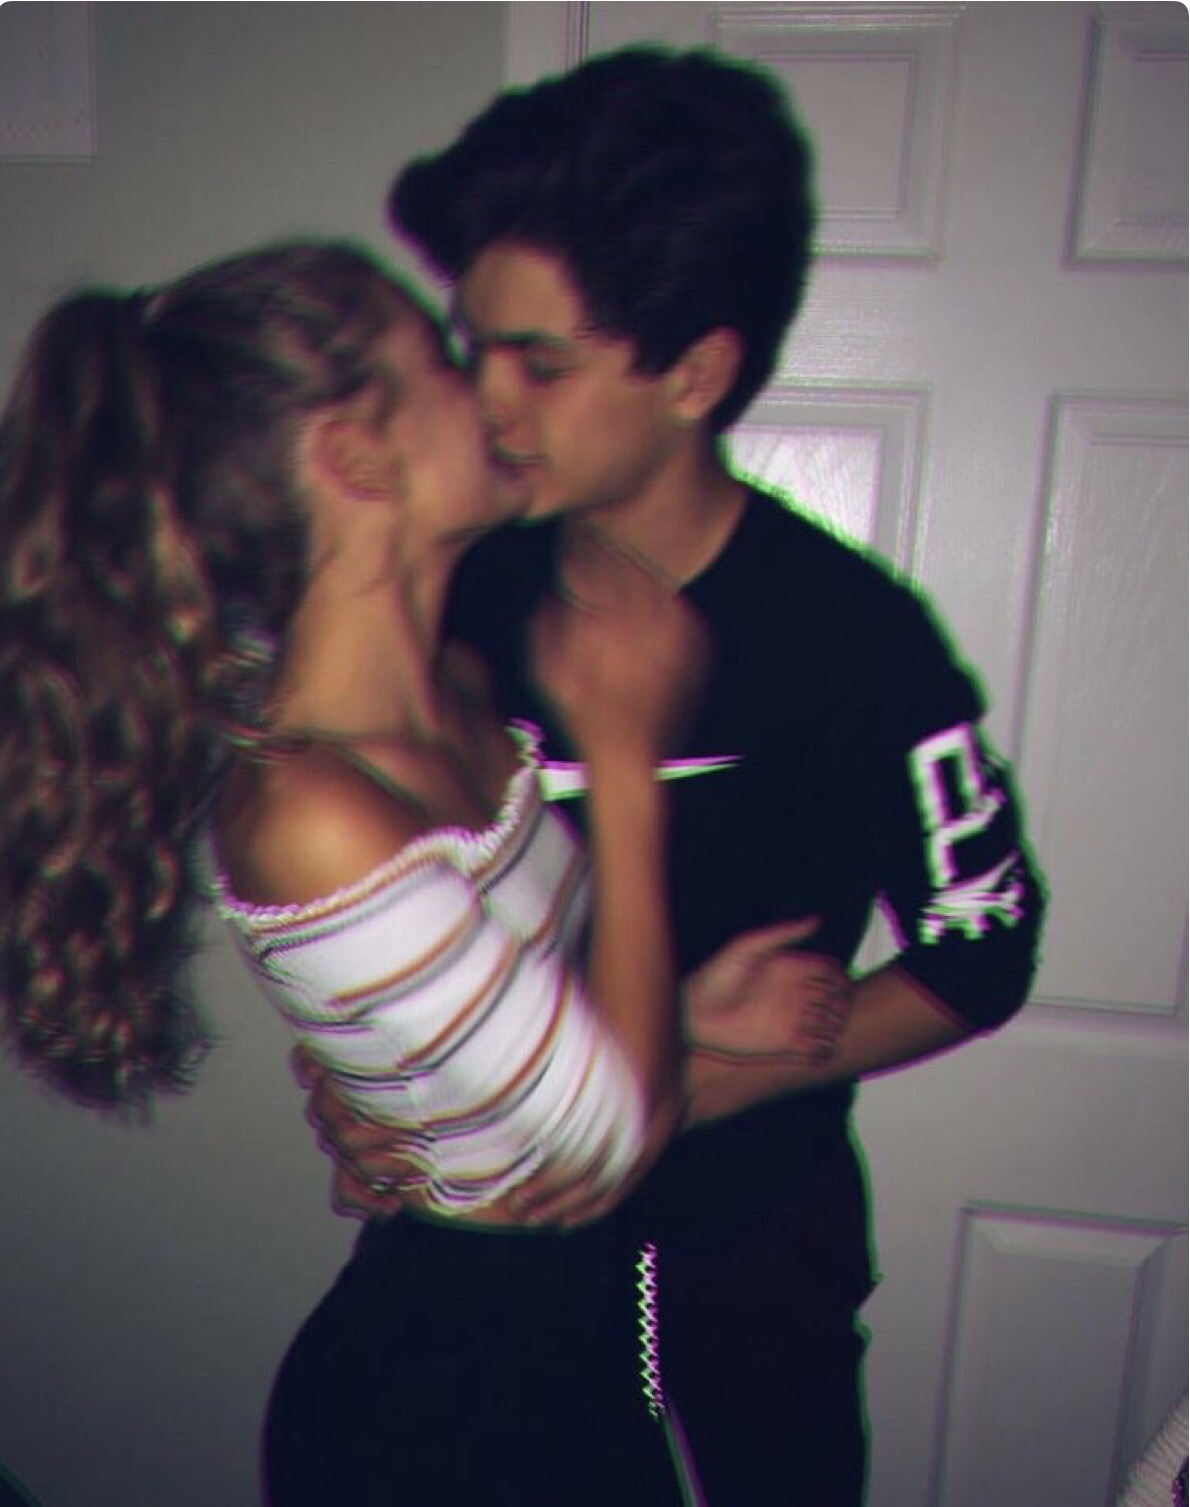 Best Couples In Love Images Ideas On Pinterest Teen Love 2